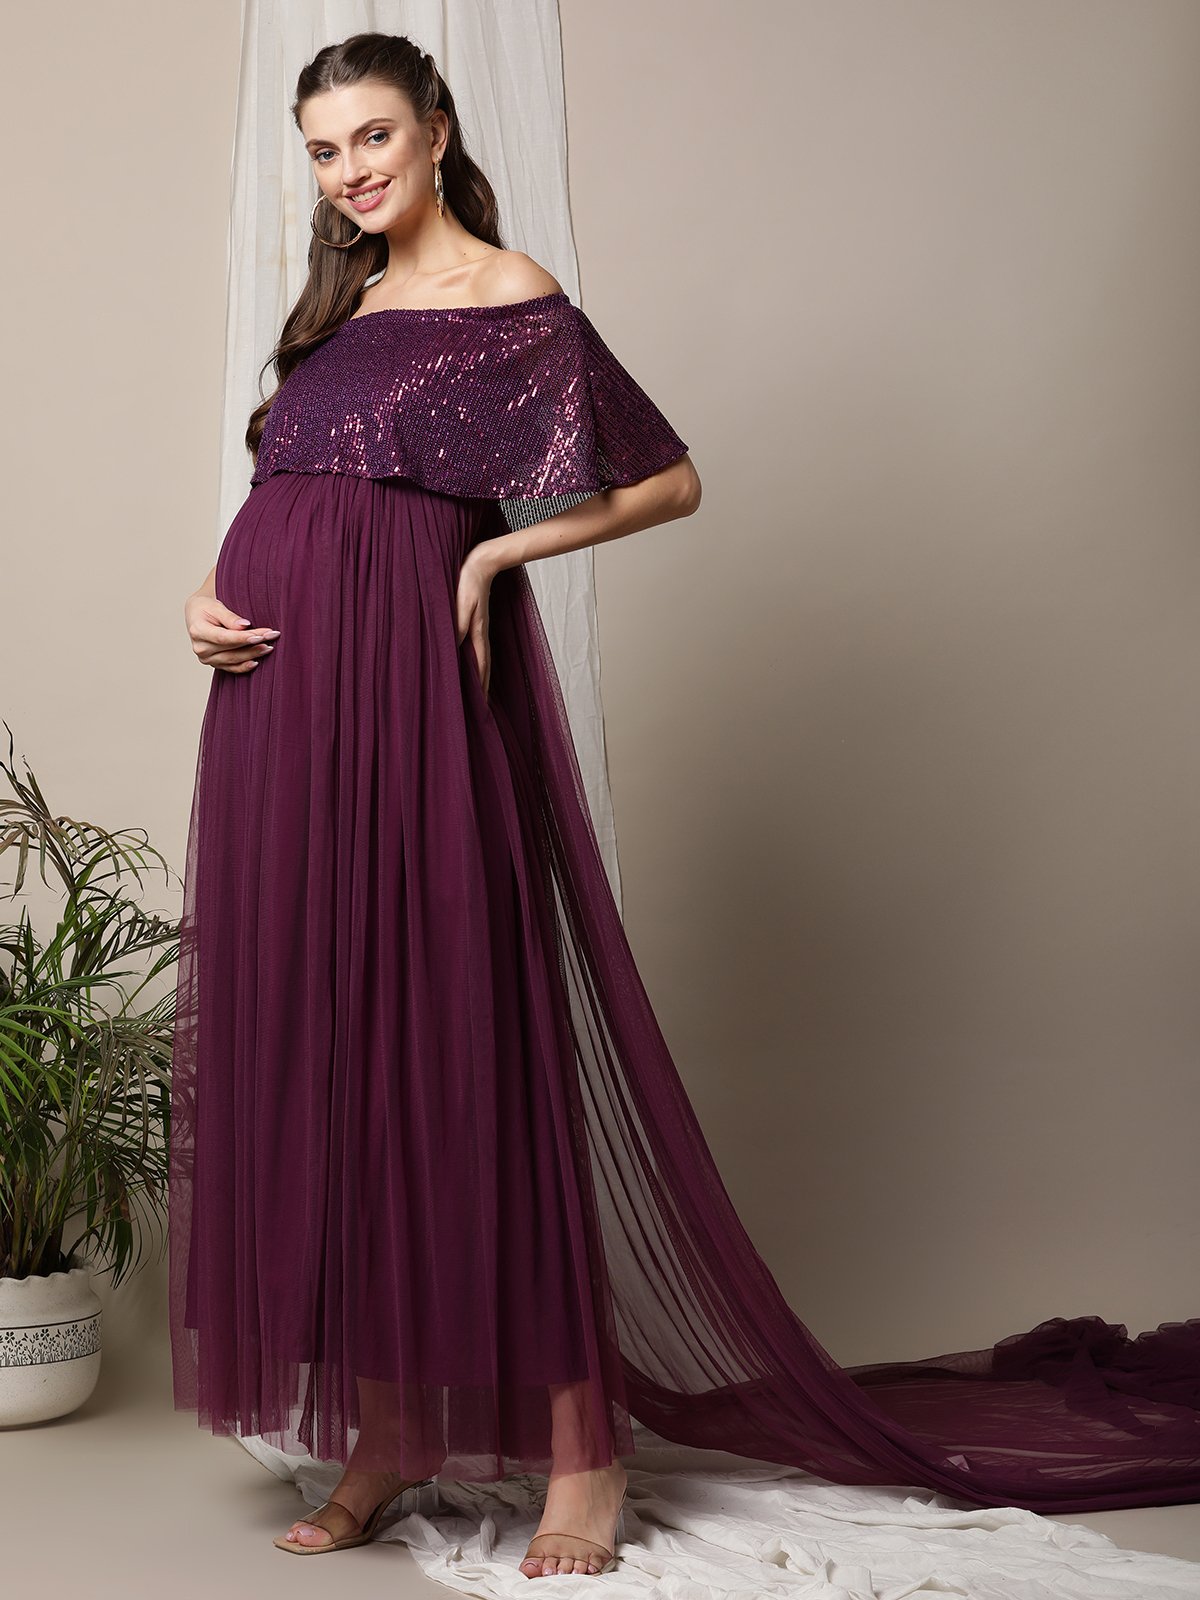 Maternity Dresses For Photo Shoot Pregnant Women Sexy Shoulderless Mermaid Gown  Pregnancy Dress Baby Shower Photography Props Q0713 From 21,47 € | DHgate